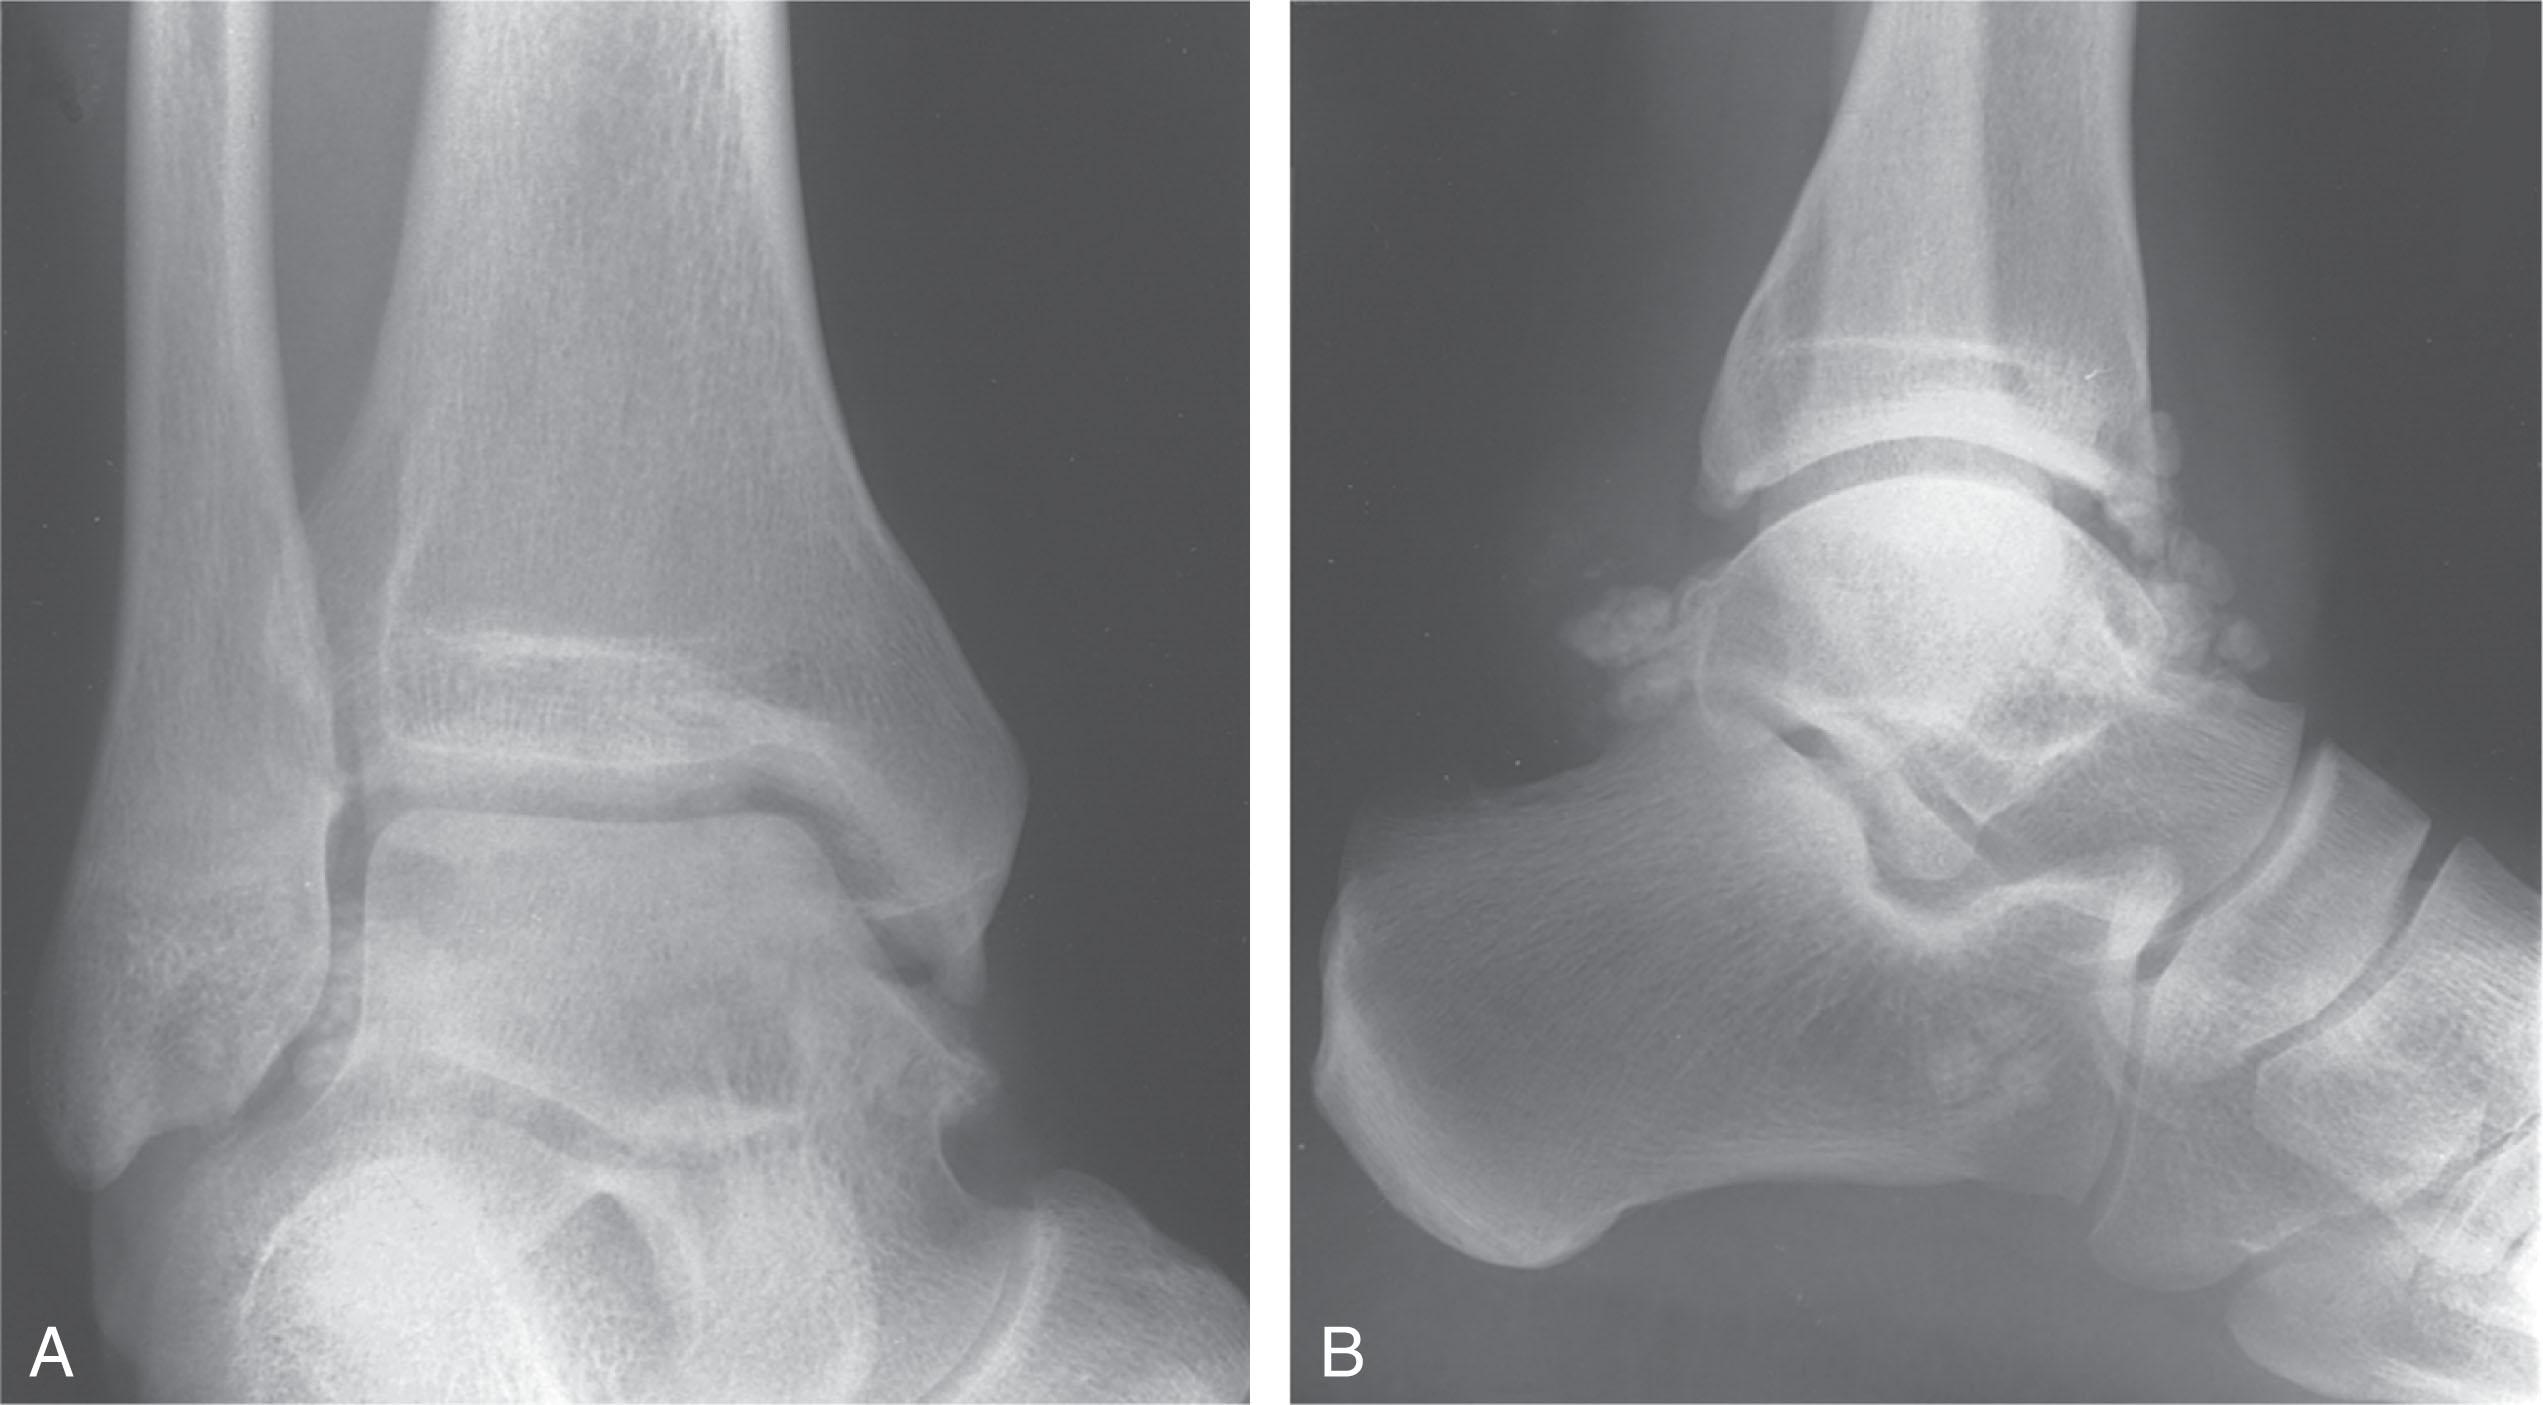 Fig. 39-39, Synovial osteochondromatosis of the ankle. A , Anteroposterior view. B , Lateral view.